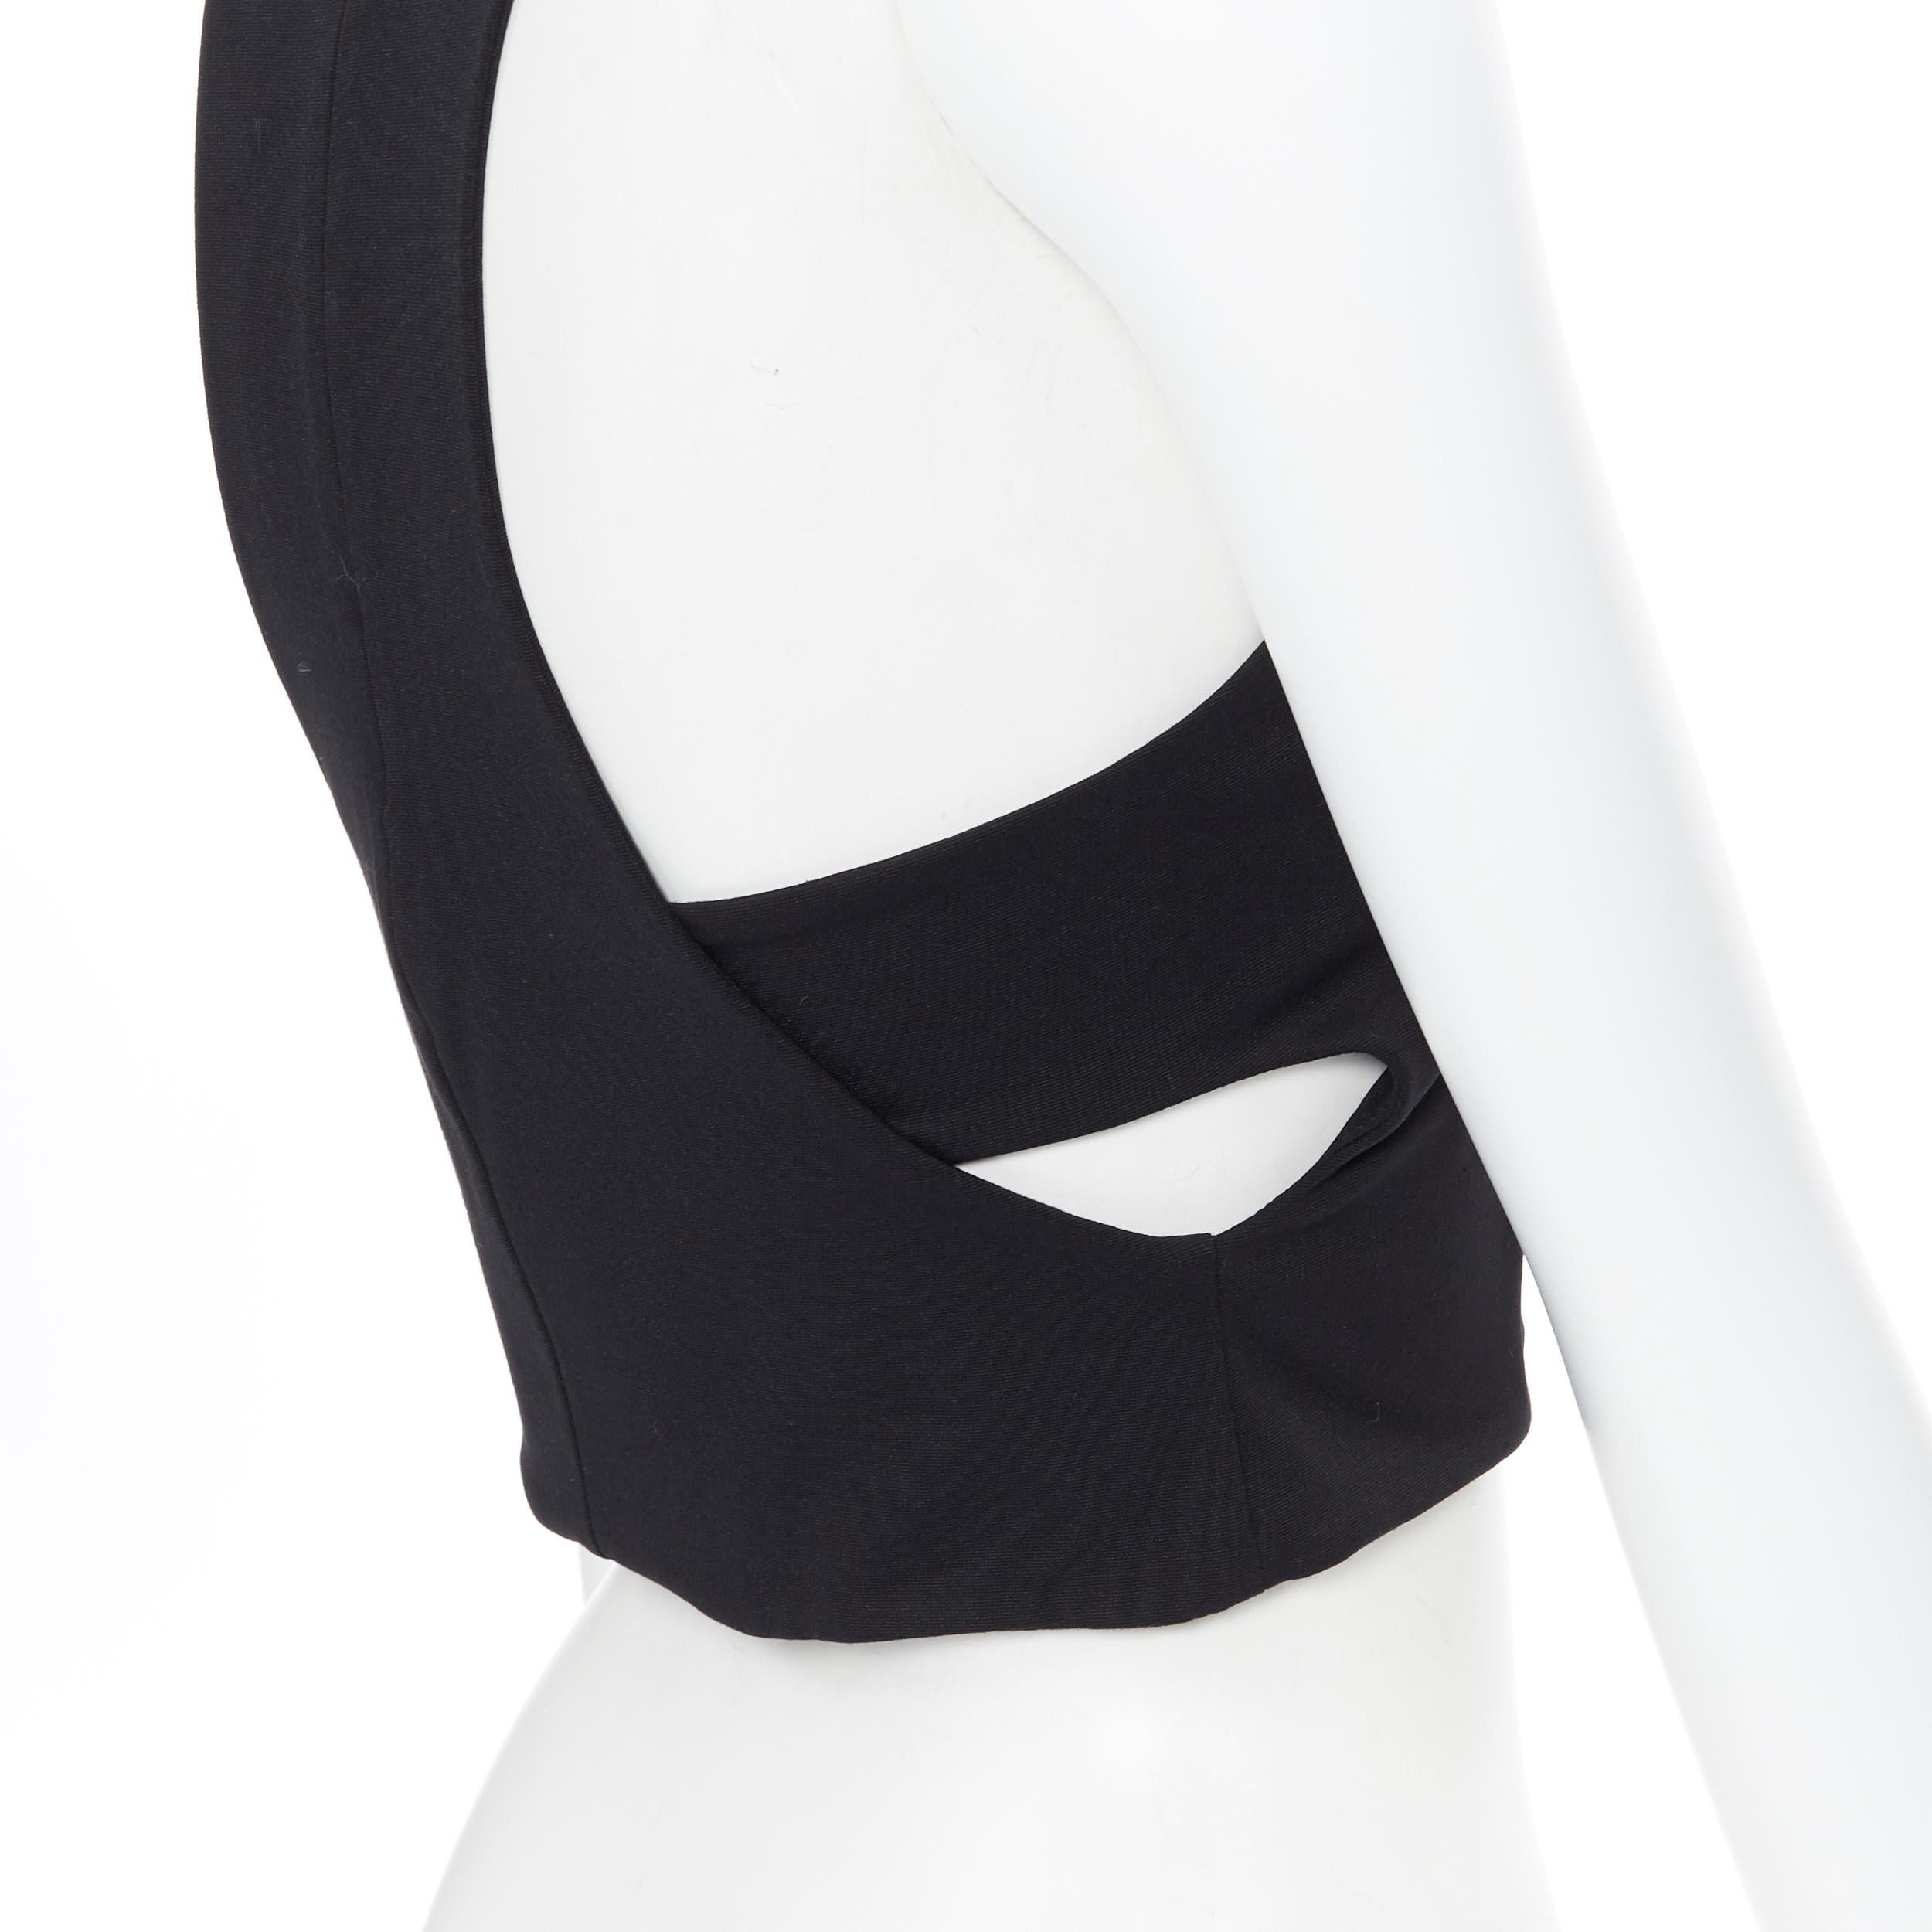 T BY ALEXANDER WANG black cut out crossover bandage back sports crop top M
Brand: T by Aleexander Wang
Designer: Alexander Wang
Model Name / Style: Crop top
Material: Modal blend
Color: Black
Pattern: Solid
Extra Detail: Bandage detail at back.
Made